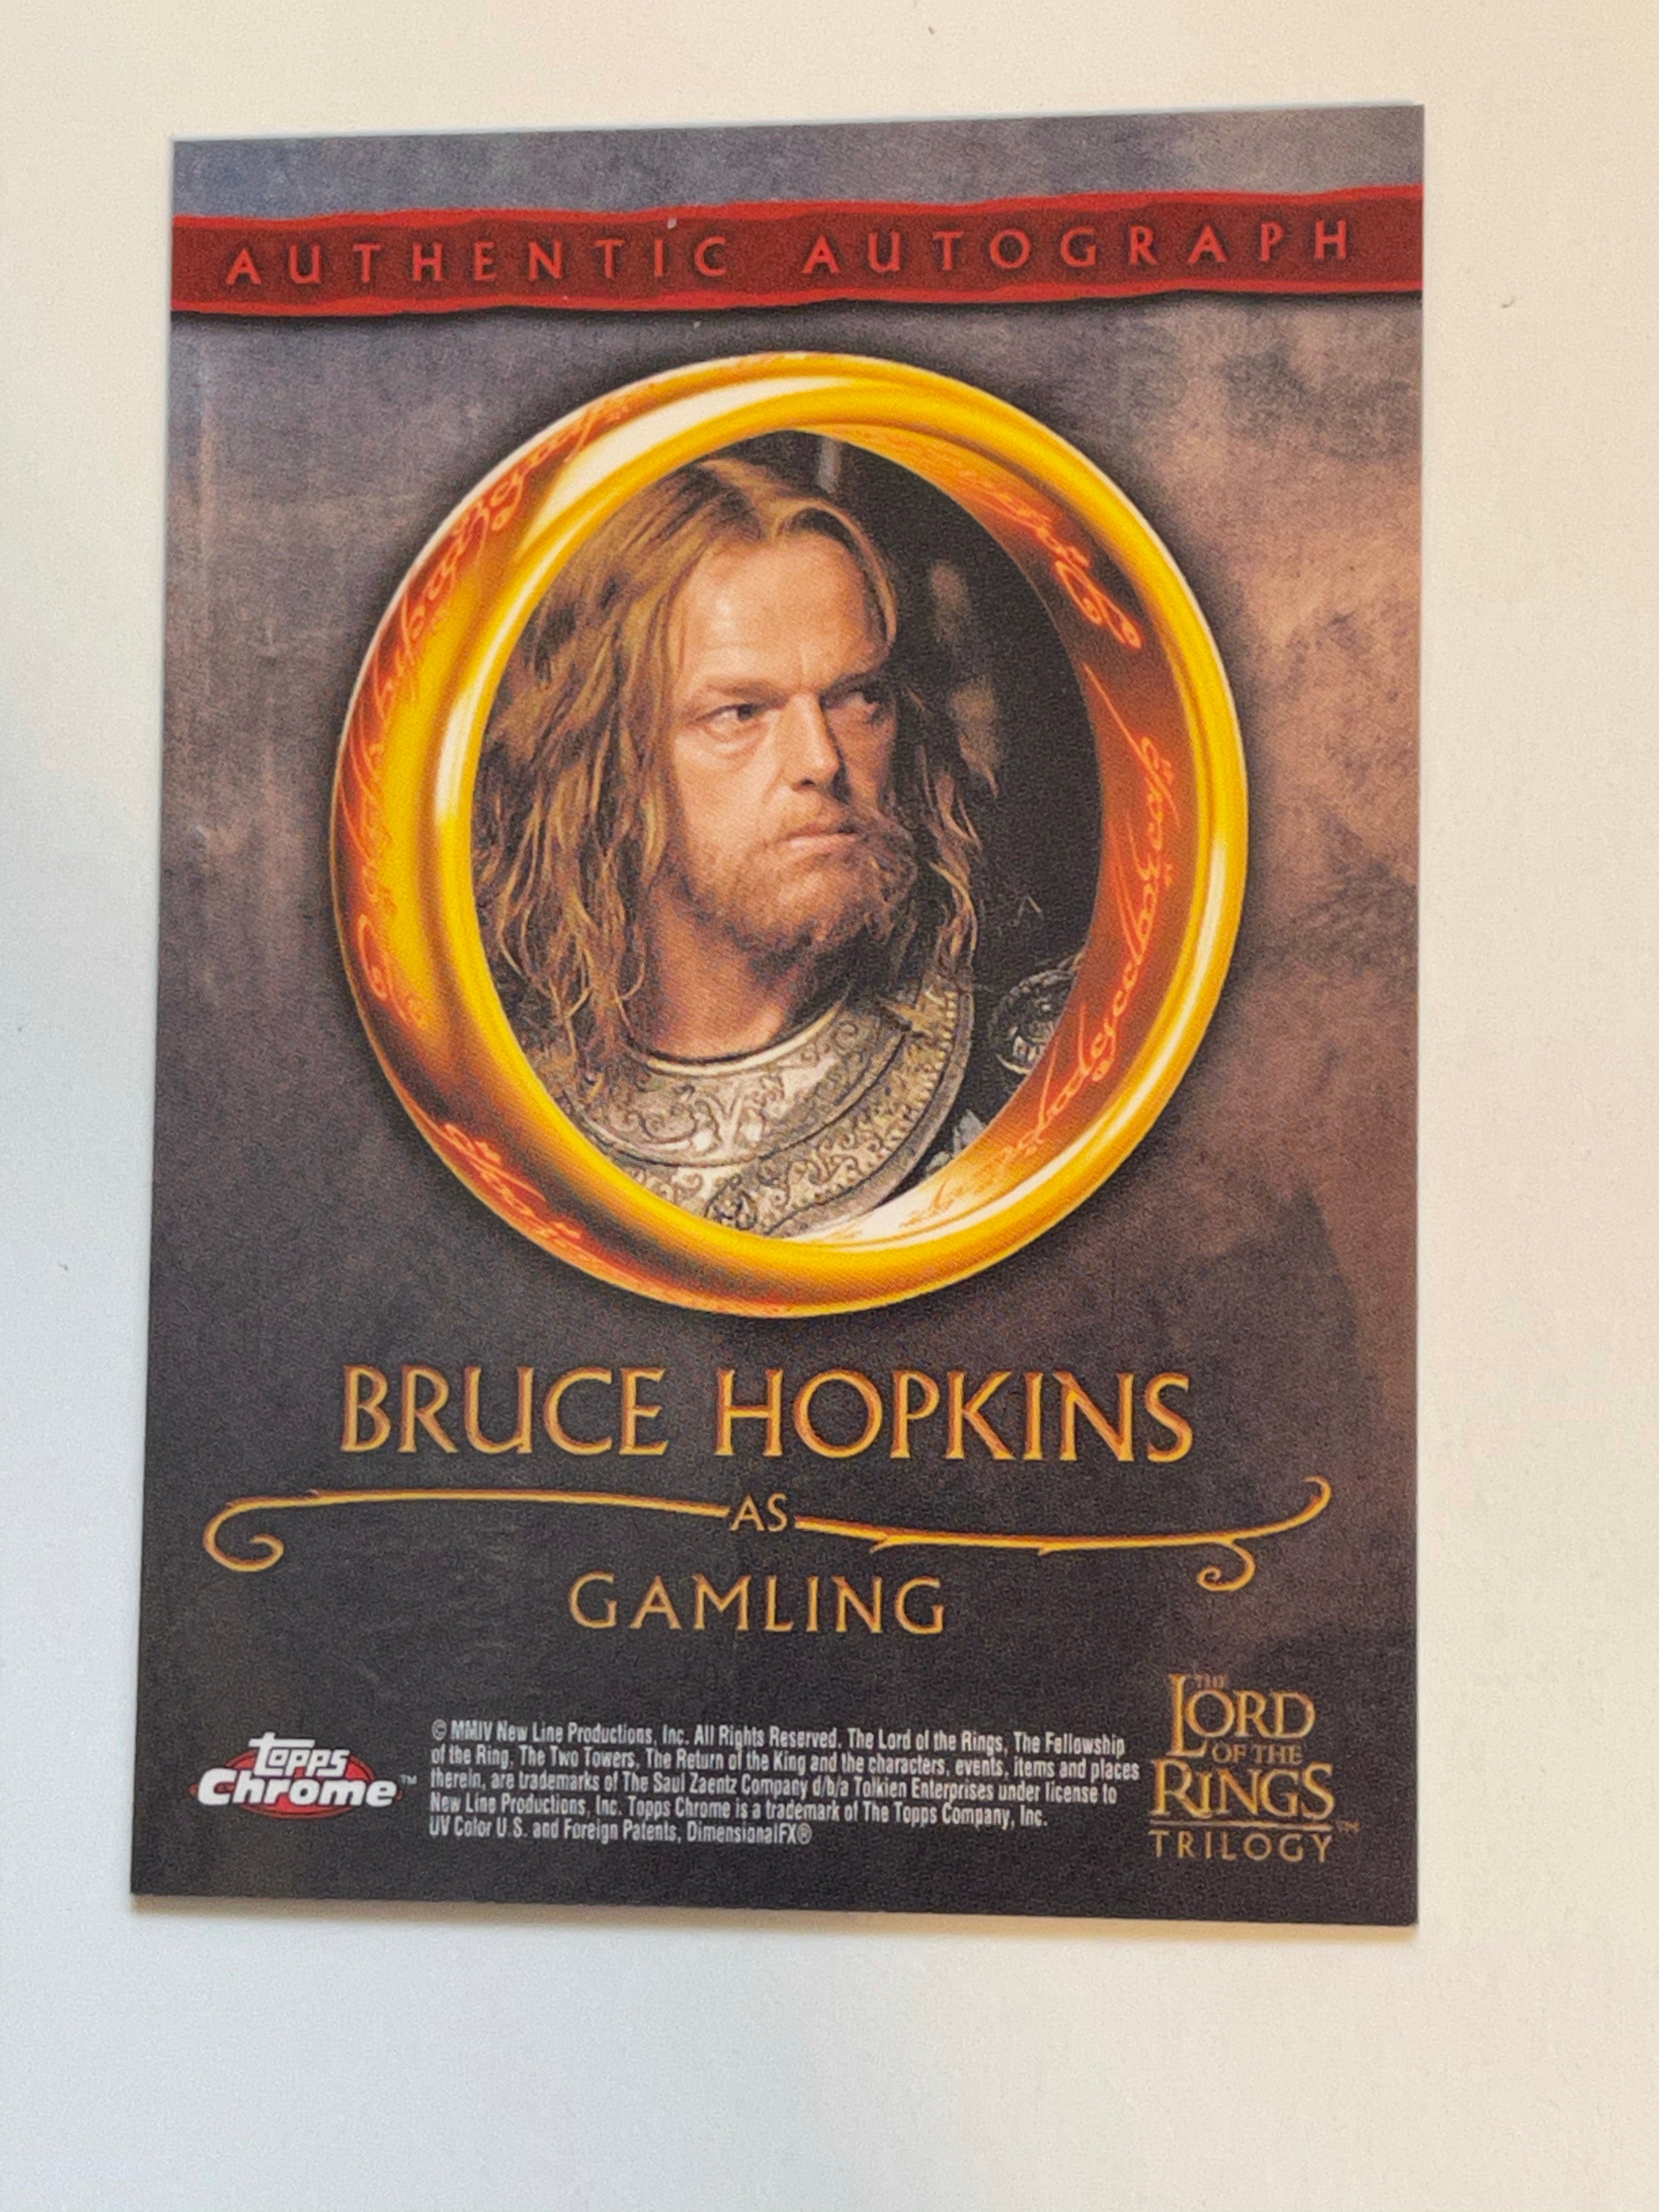 Lord of the Rings Gambling autograph insert card